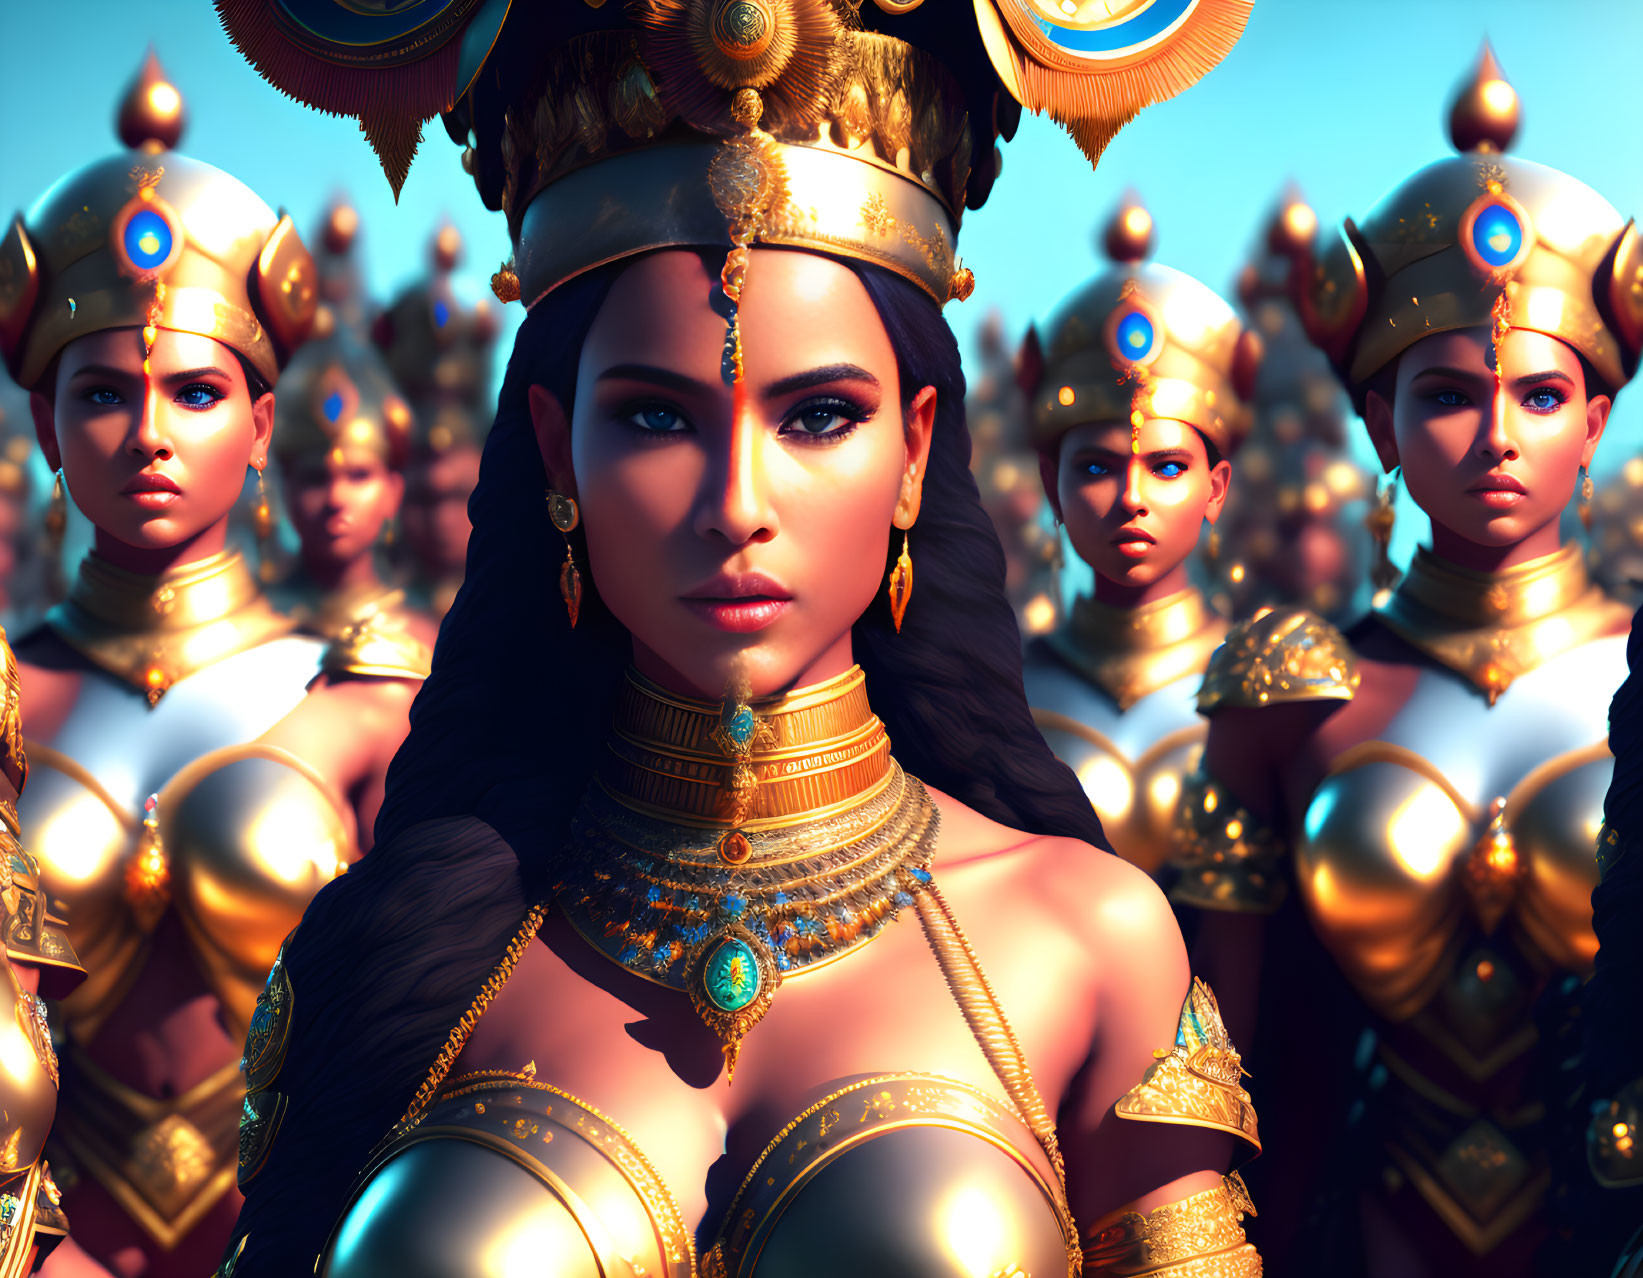 Regal woman with crown and soldiers in golden armor under blue sky